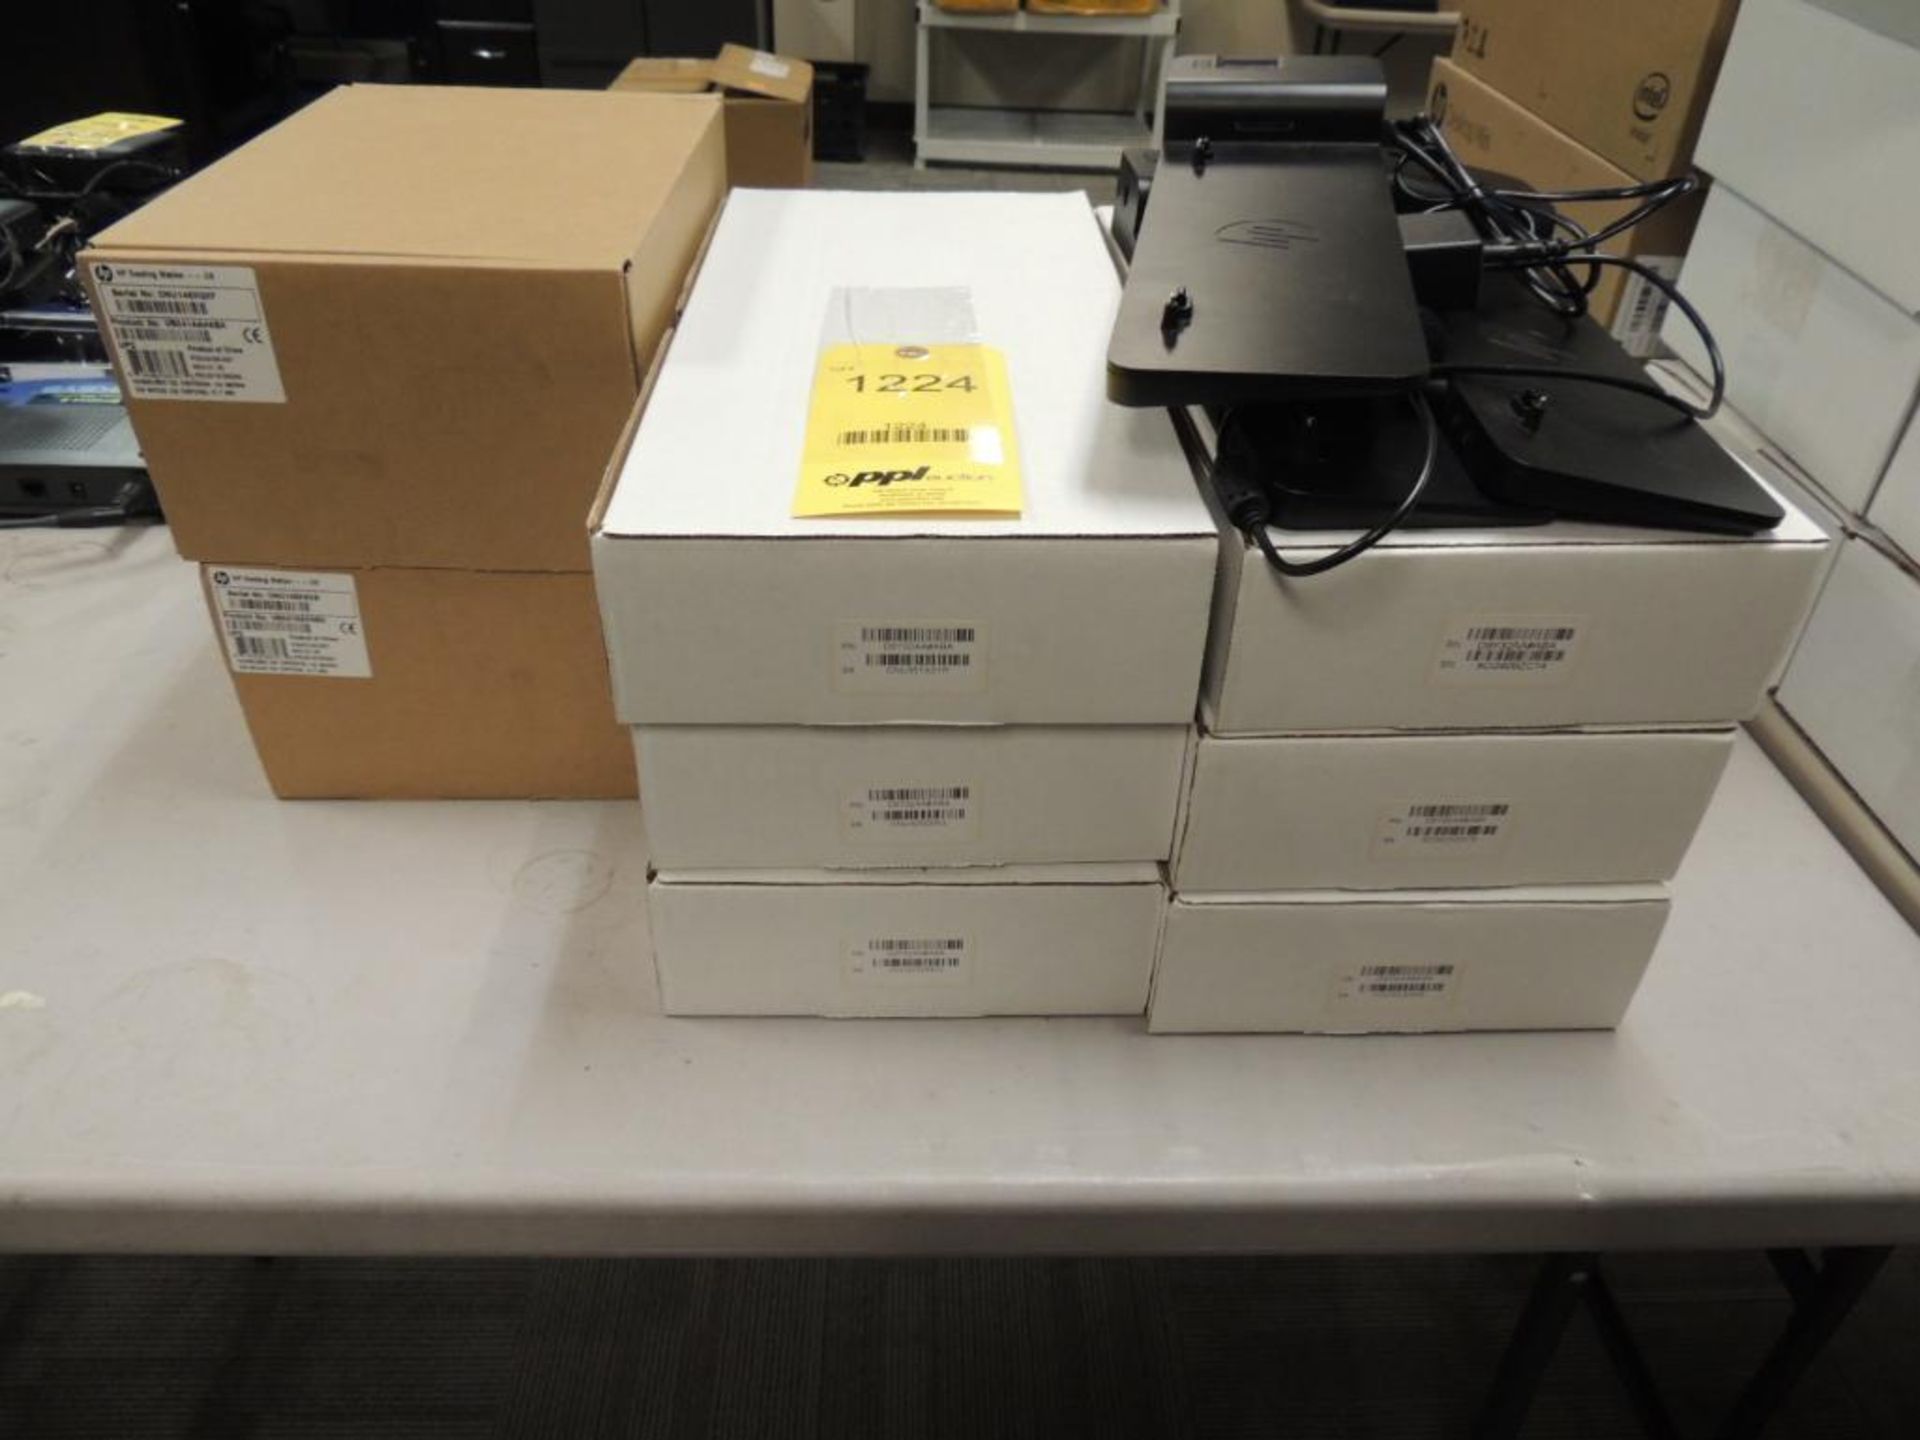 LOT: Docking Stations including (2) NEW HP CNU146XQXF, (6) NEW HP, (3) Used HP